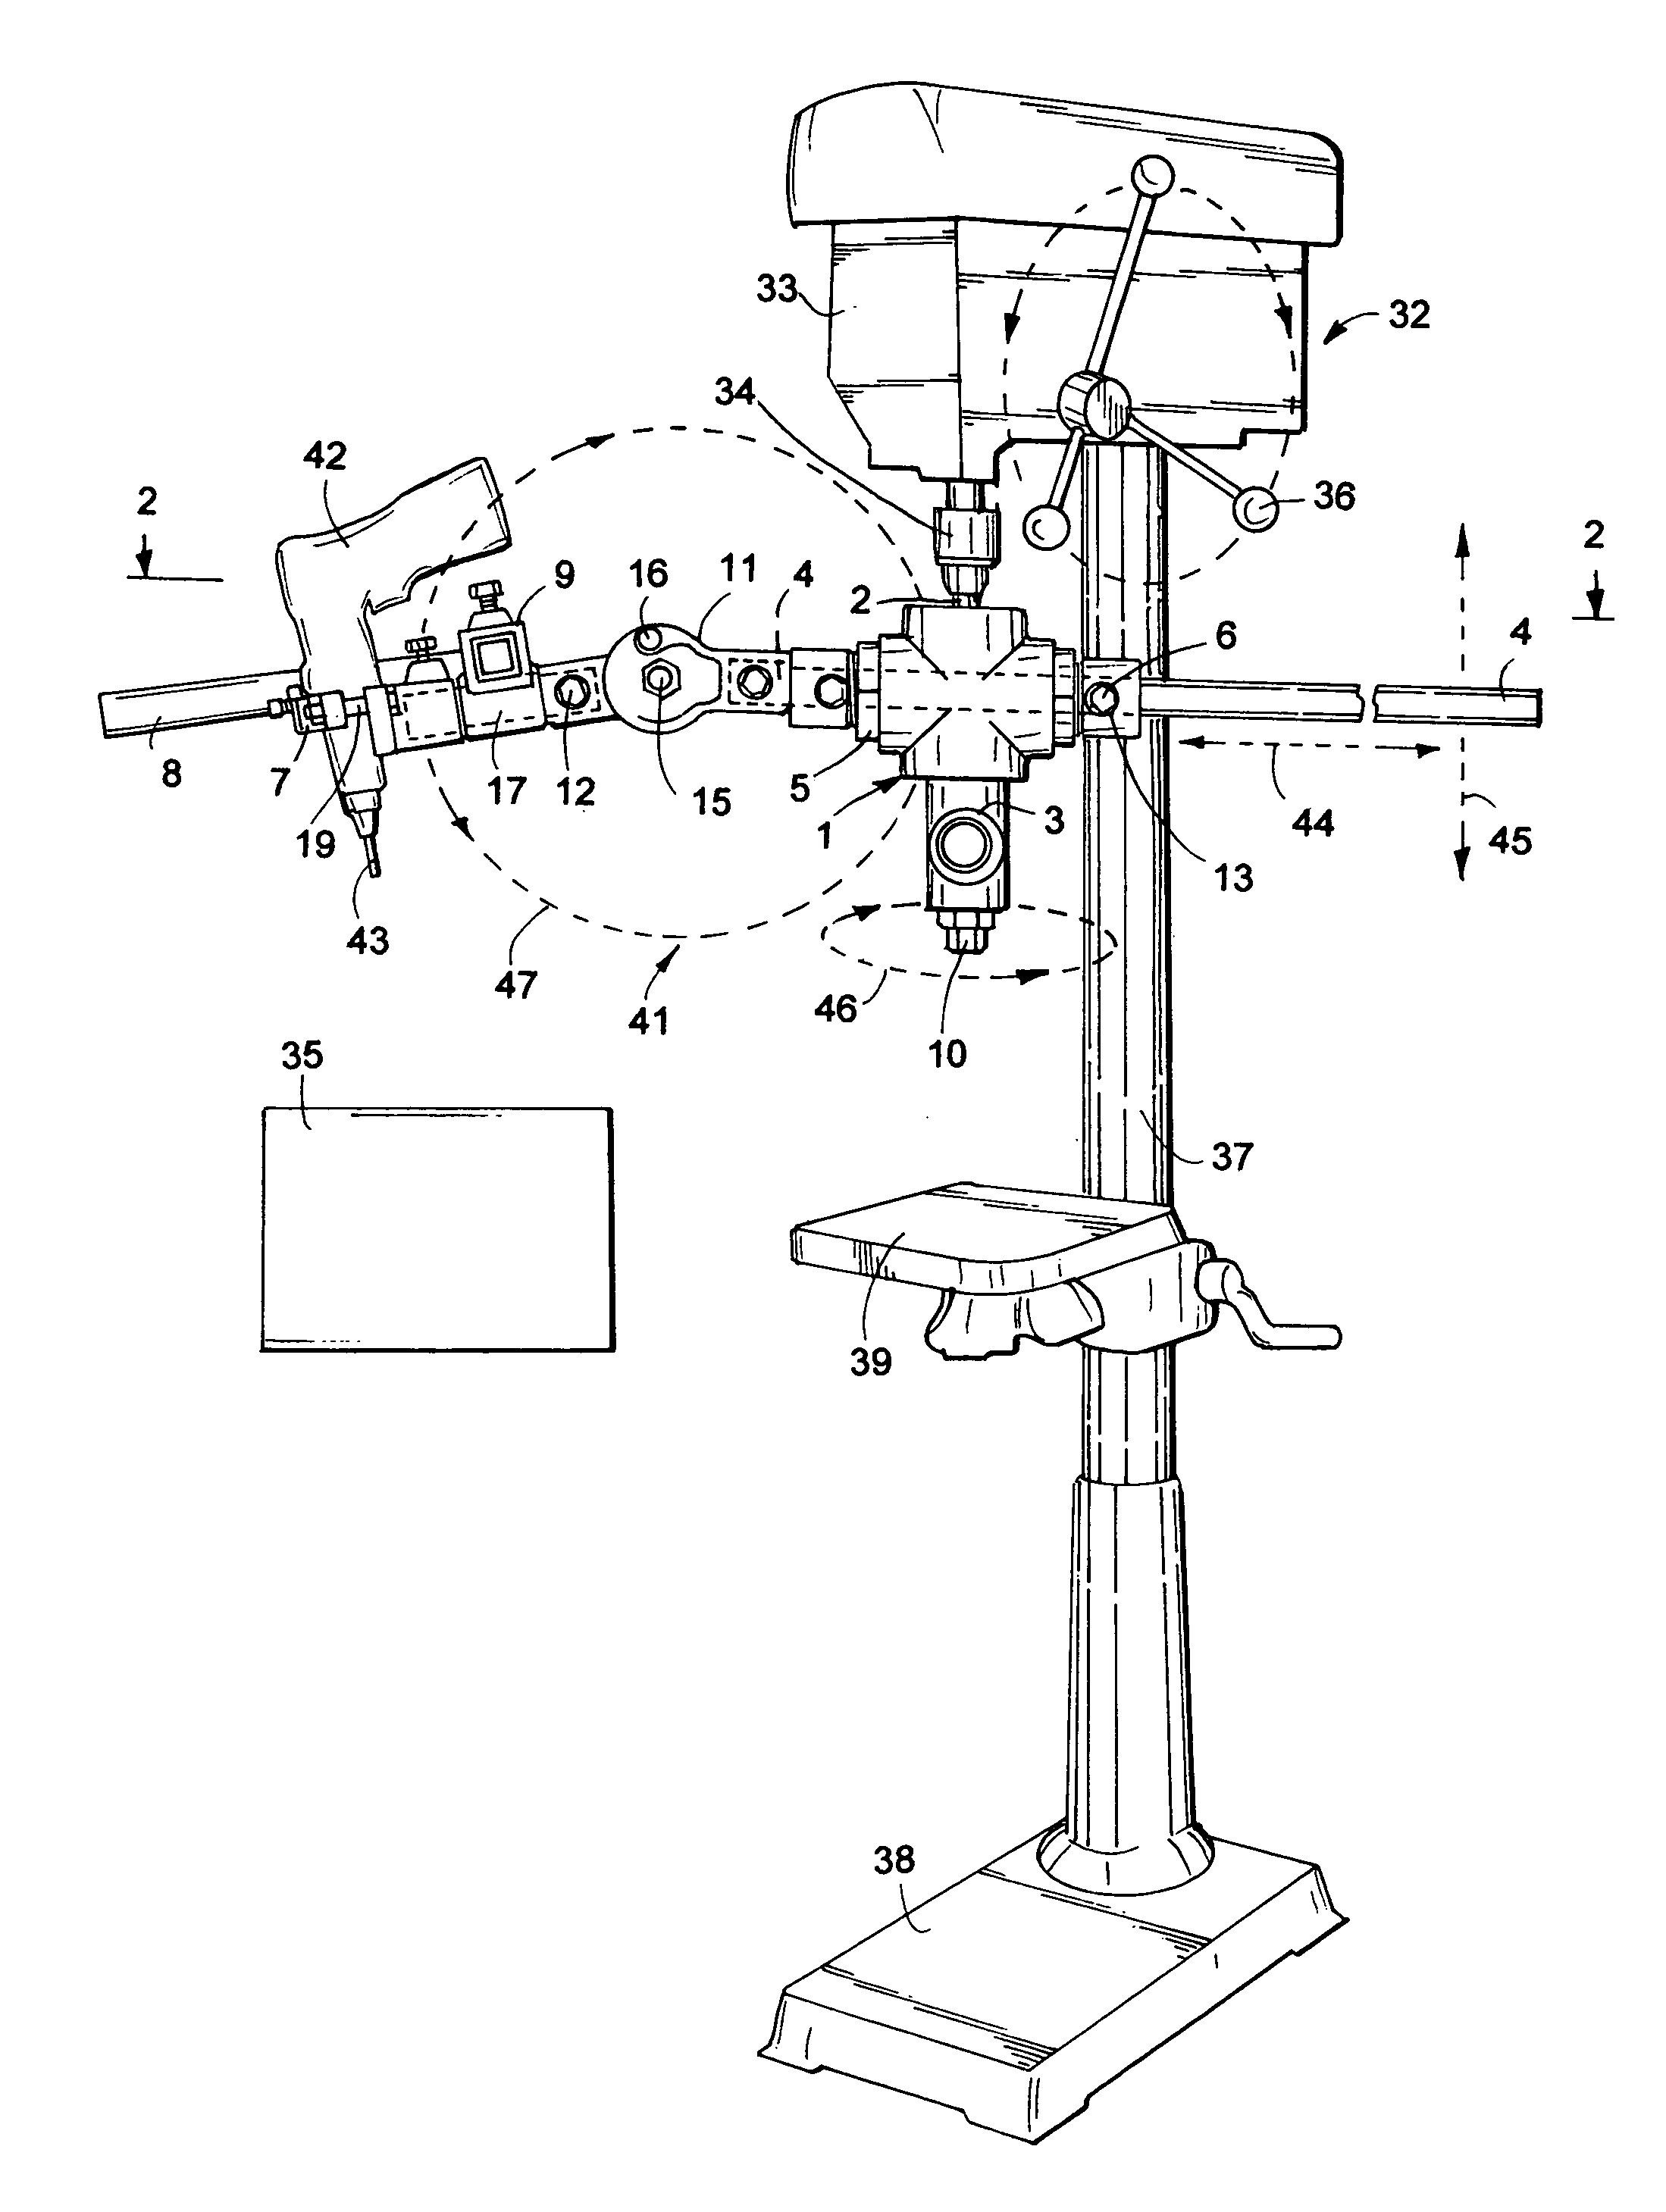 Off-set drill guide assembly and method of drilling holes in a workpiece